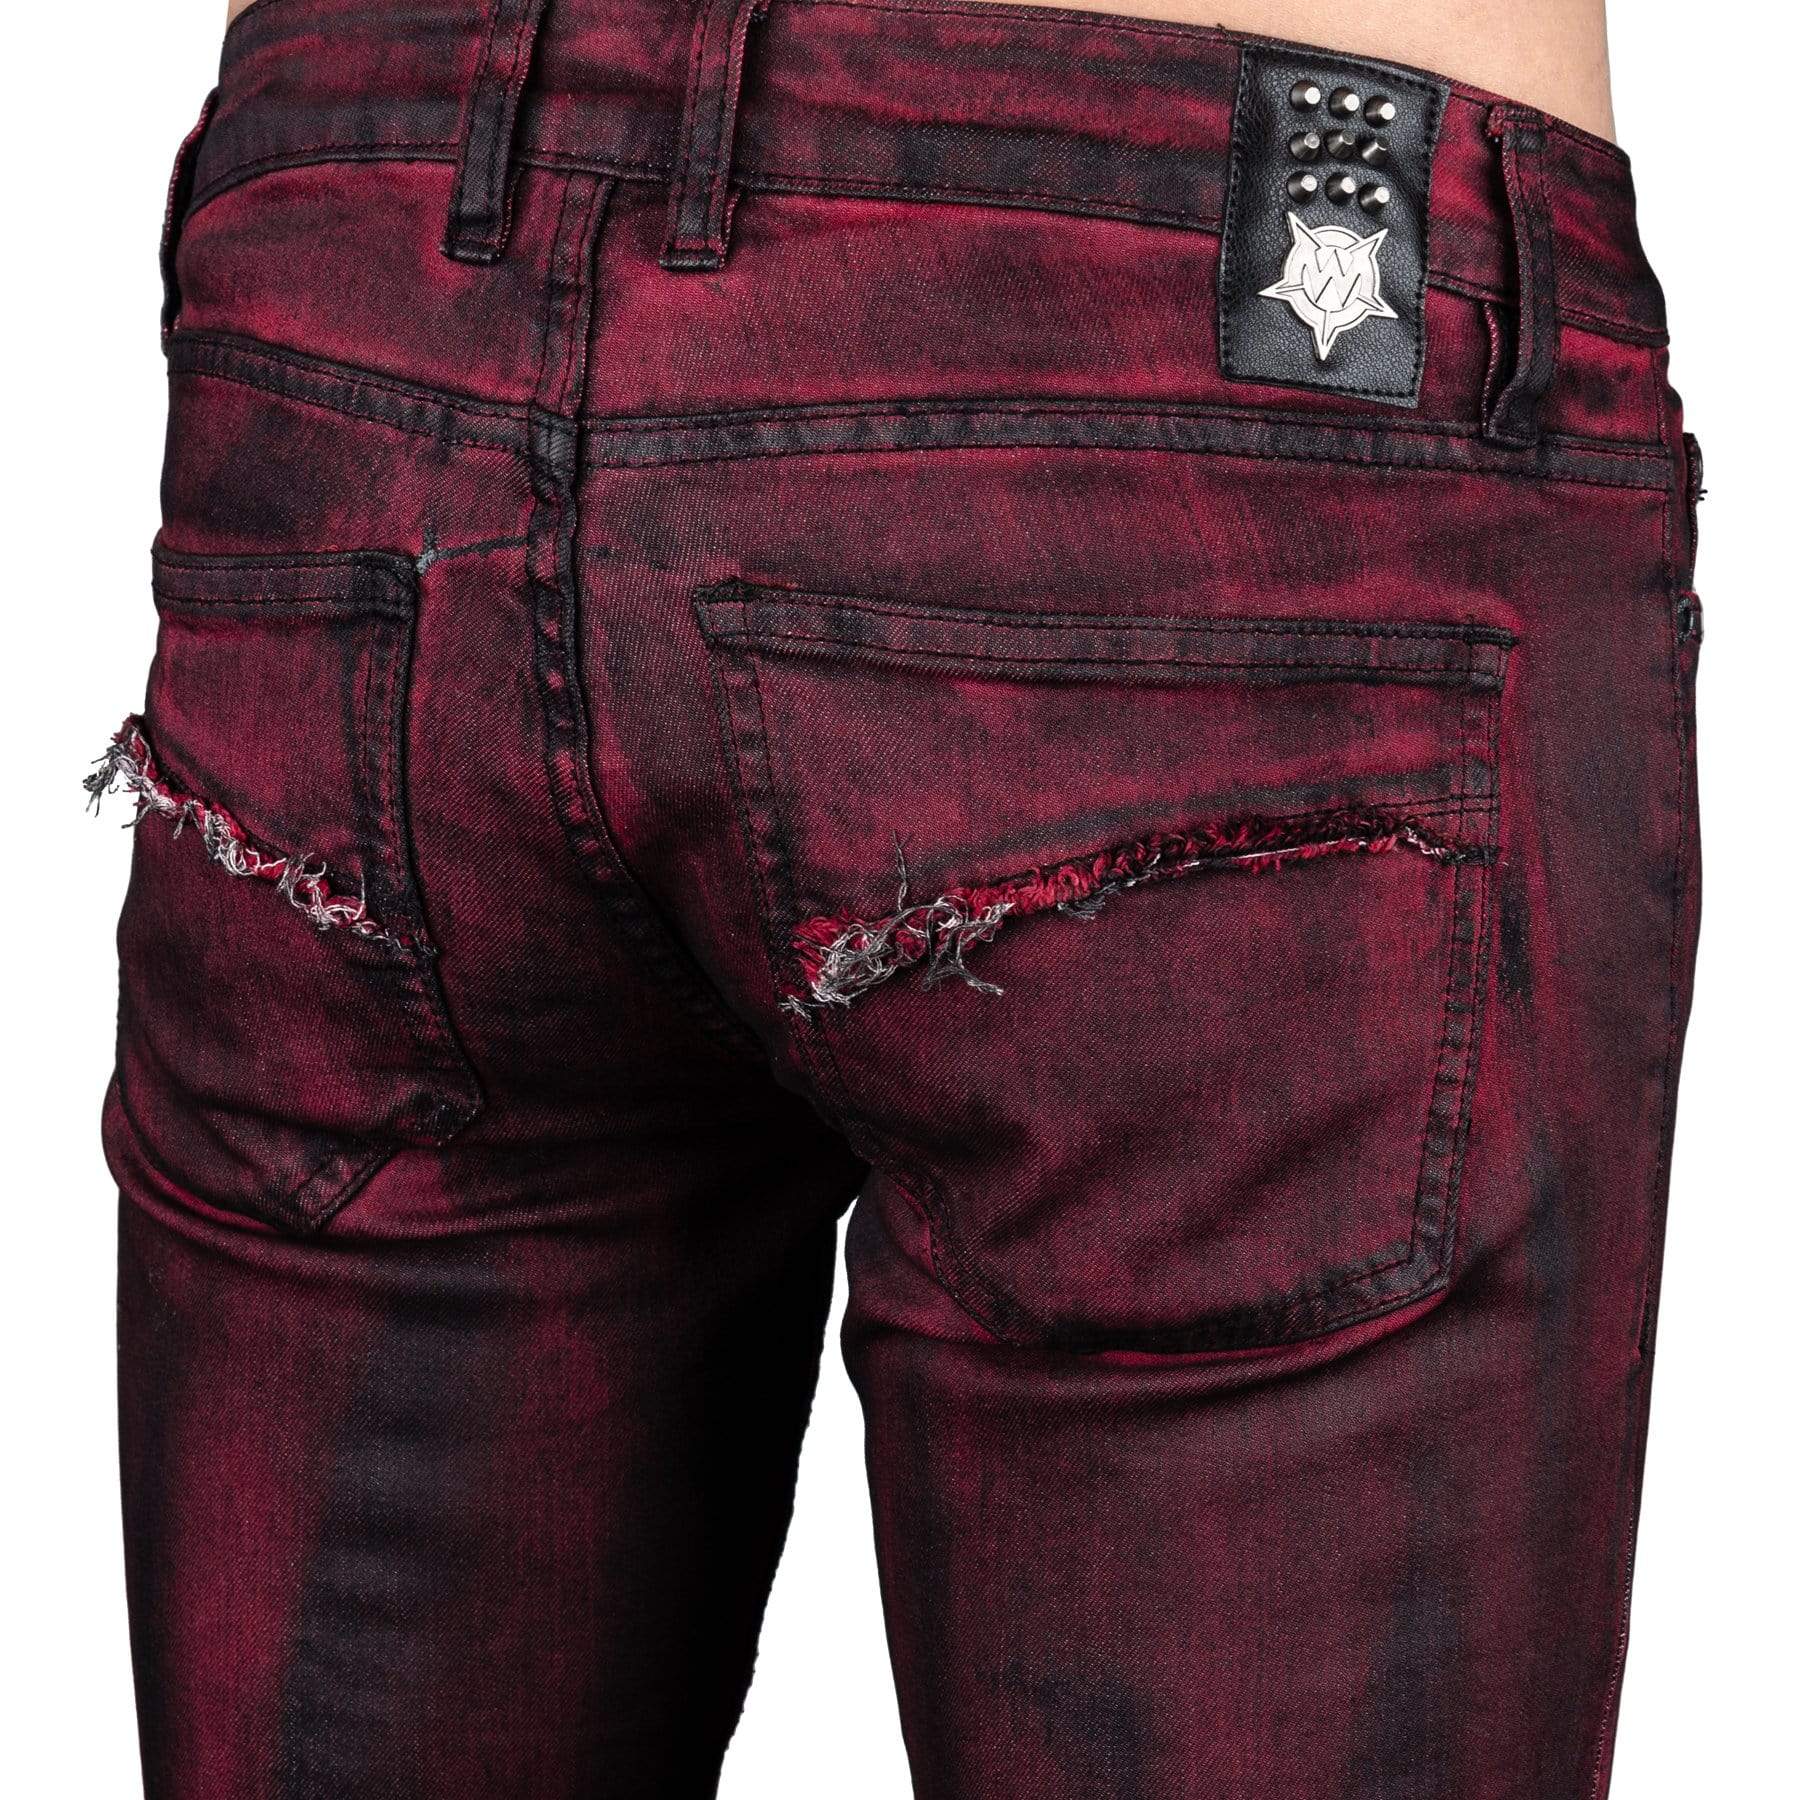 All Access Collection Pants Hellraiser Coated Jeans - Crimson